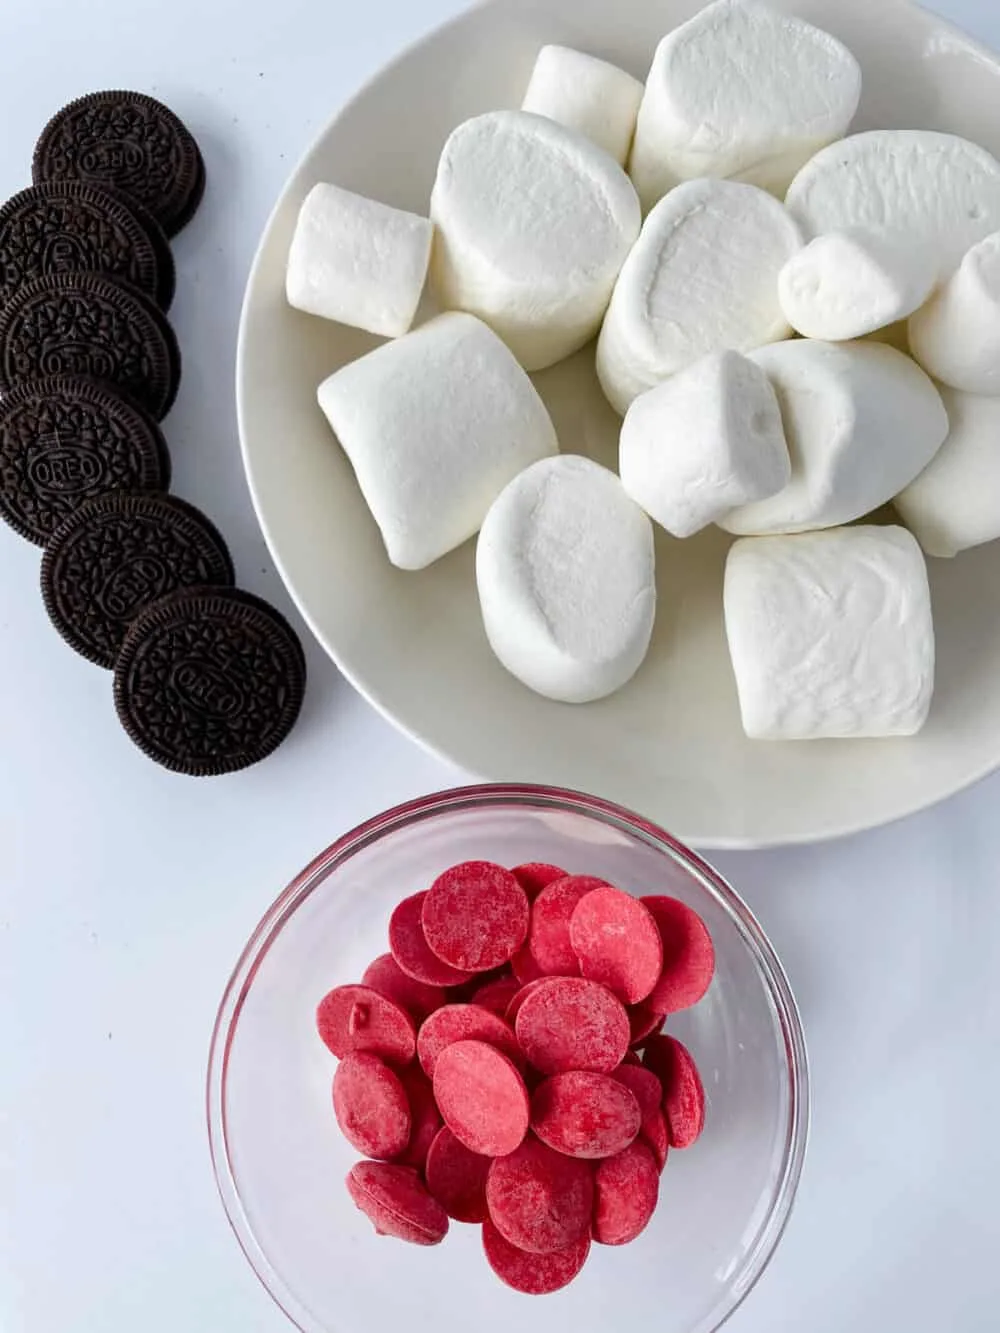 3 ingredients needed for Dr. Seuss Marshmallow Hats - chocolate sandwich cookies, marshmallows, and red candy melts